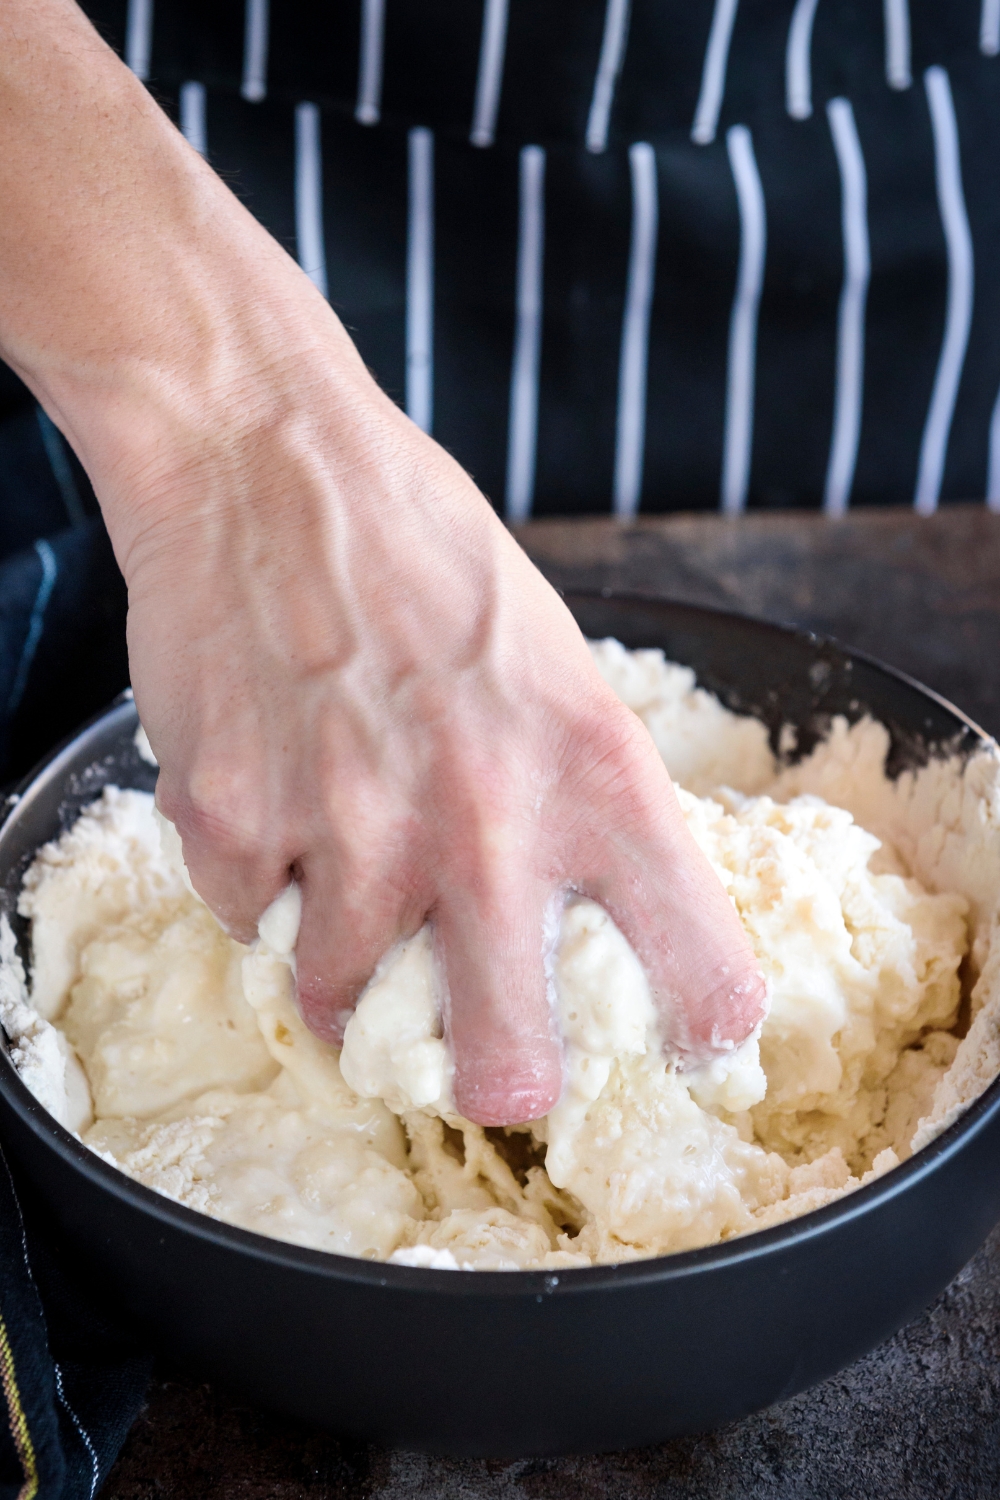 A hand mixing dough in a black bowl.